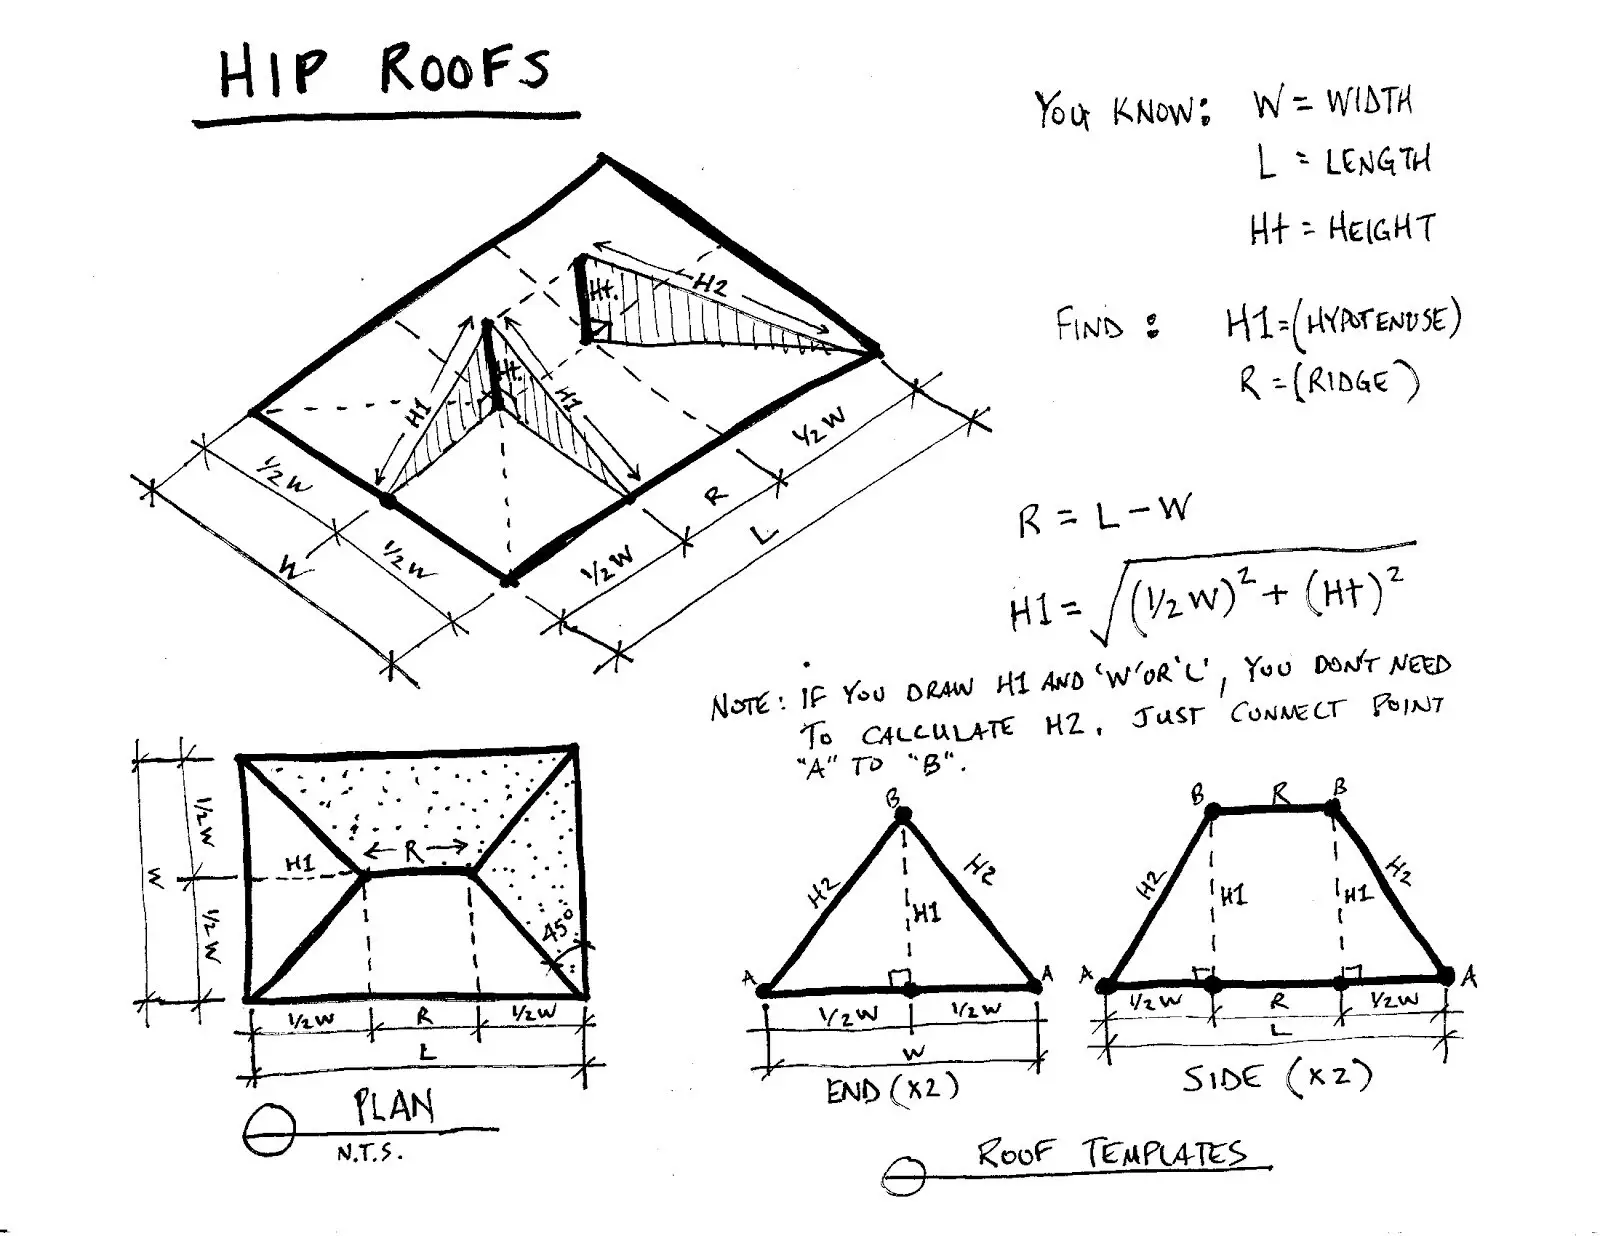 Gamer Architect: Hip Roofs: Simpler than you might think.